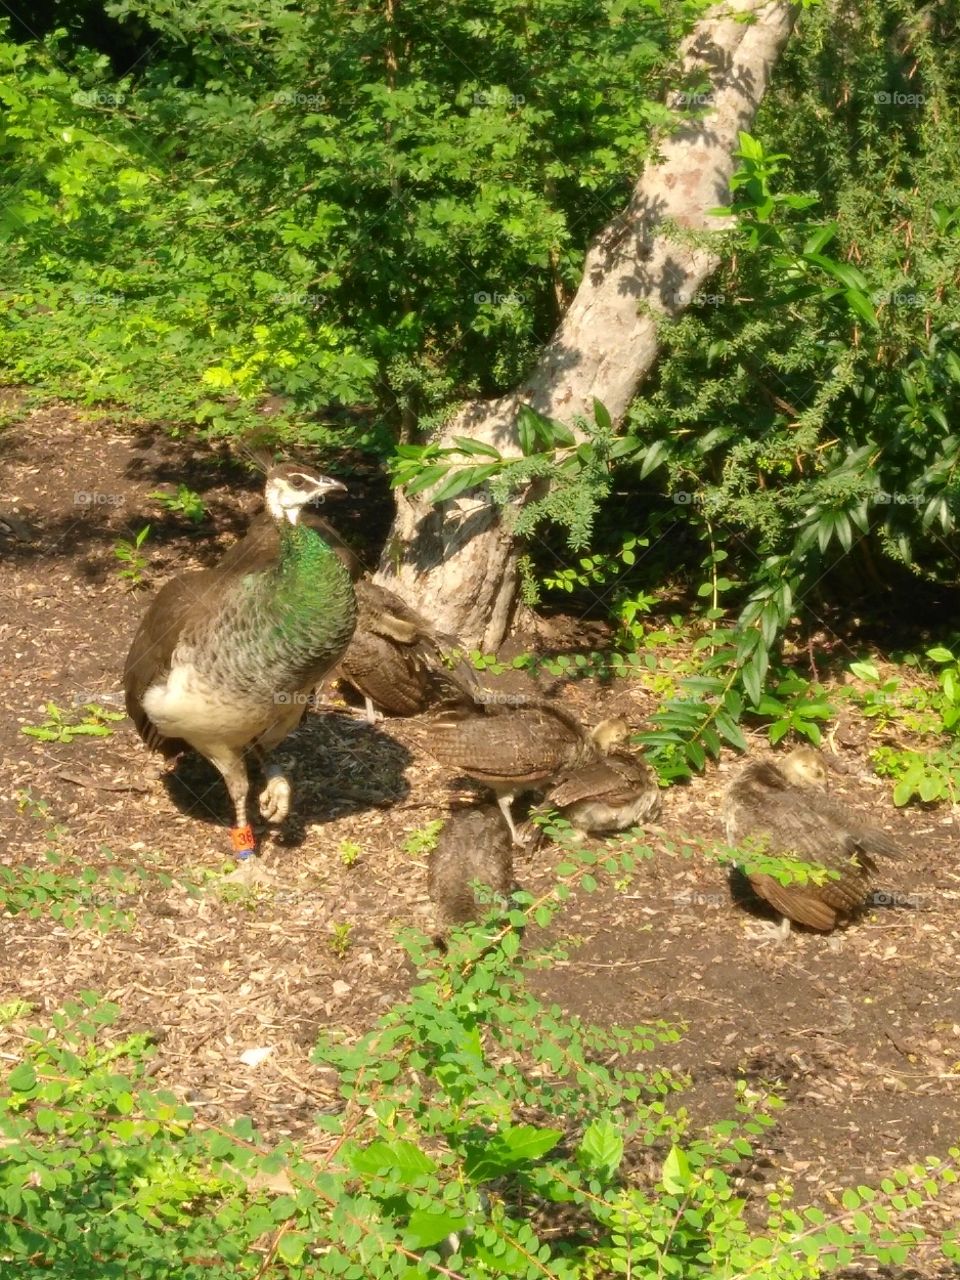 Female peacock with babies